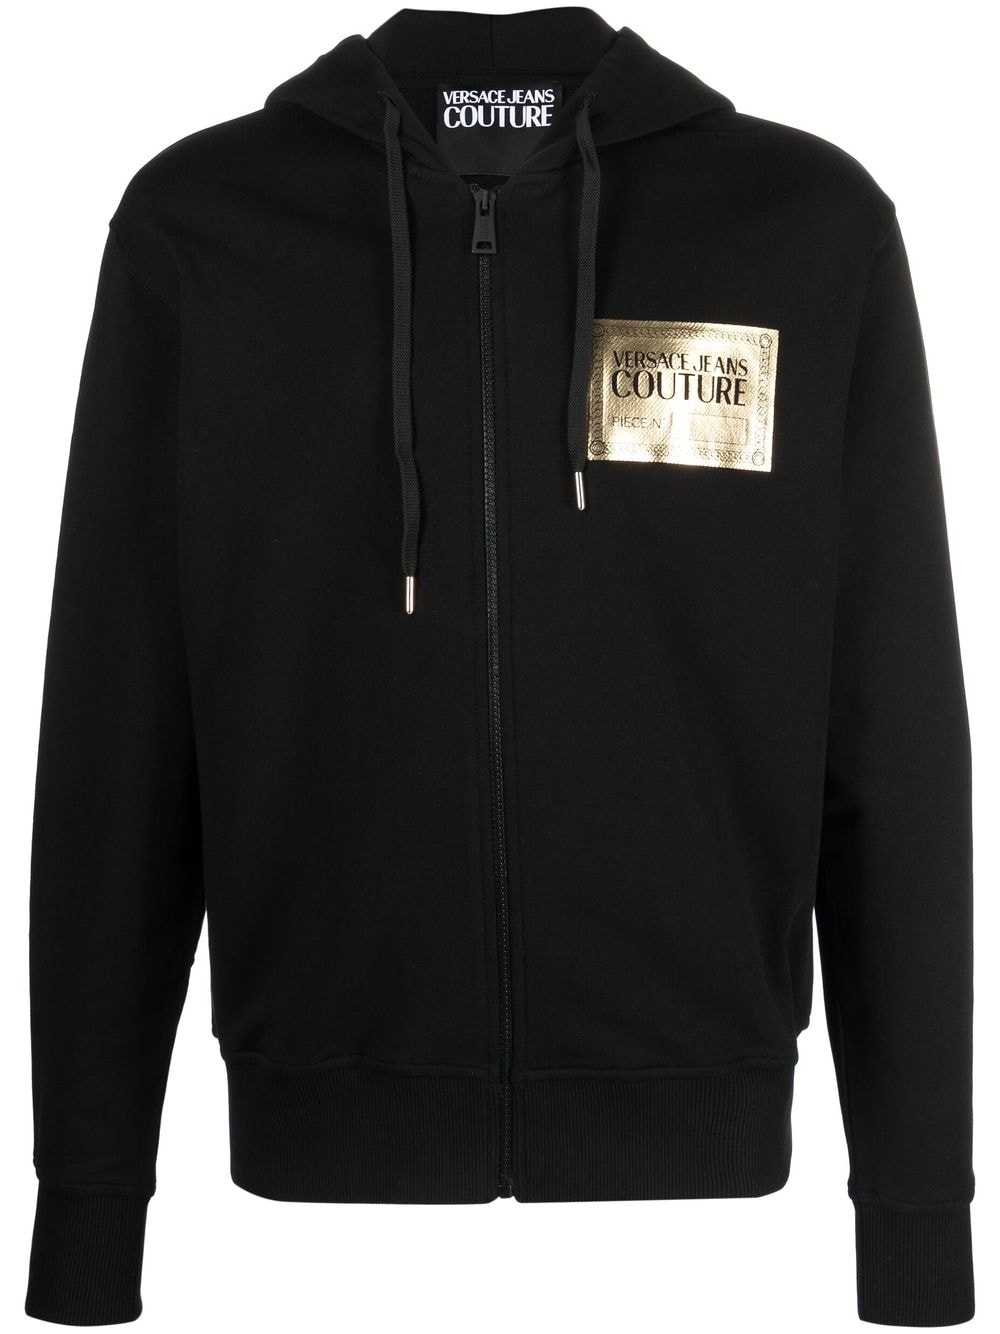 Versace Jeans Couture logo-print zipped hoodie - Black